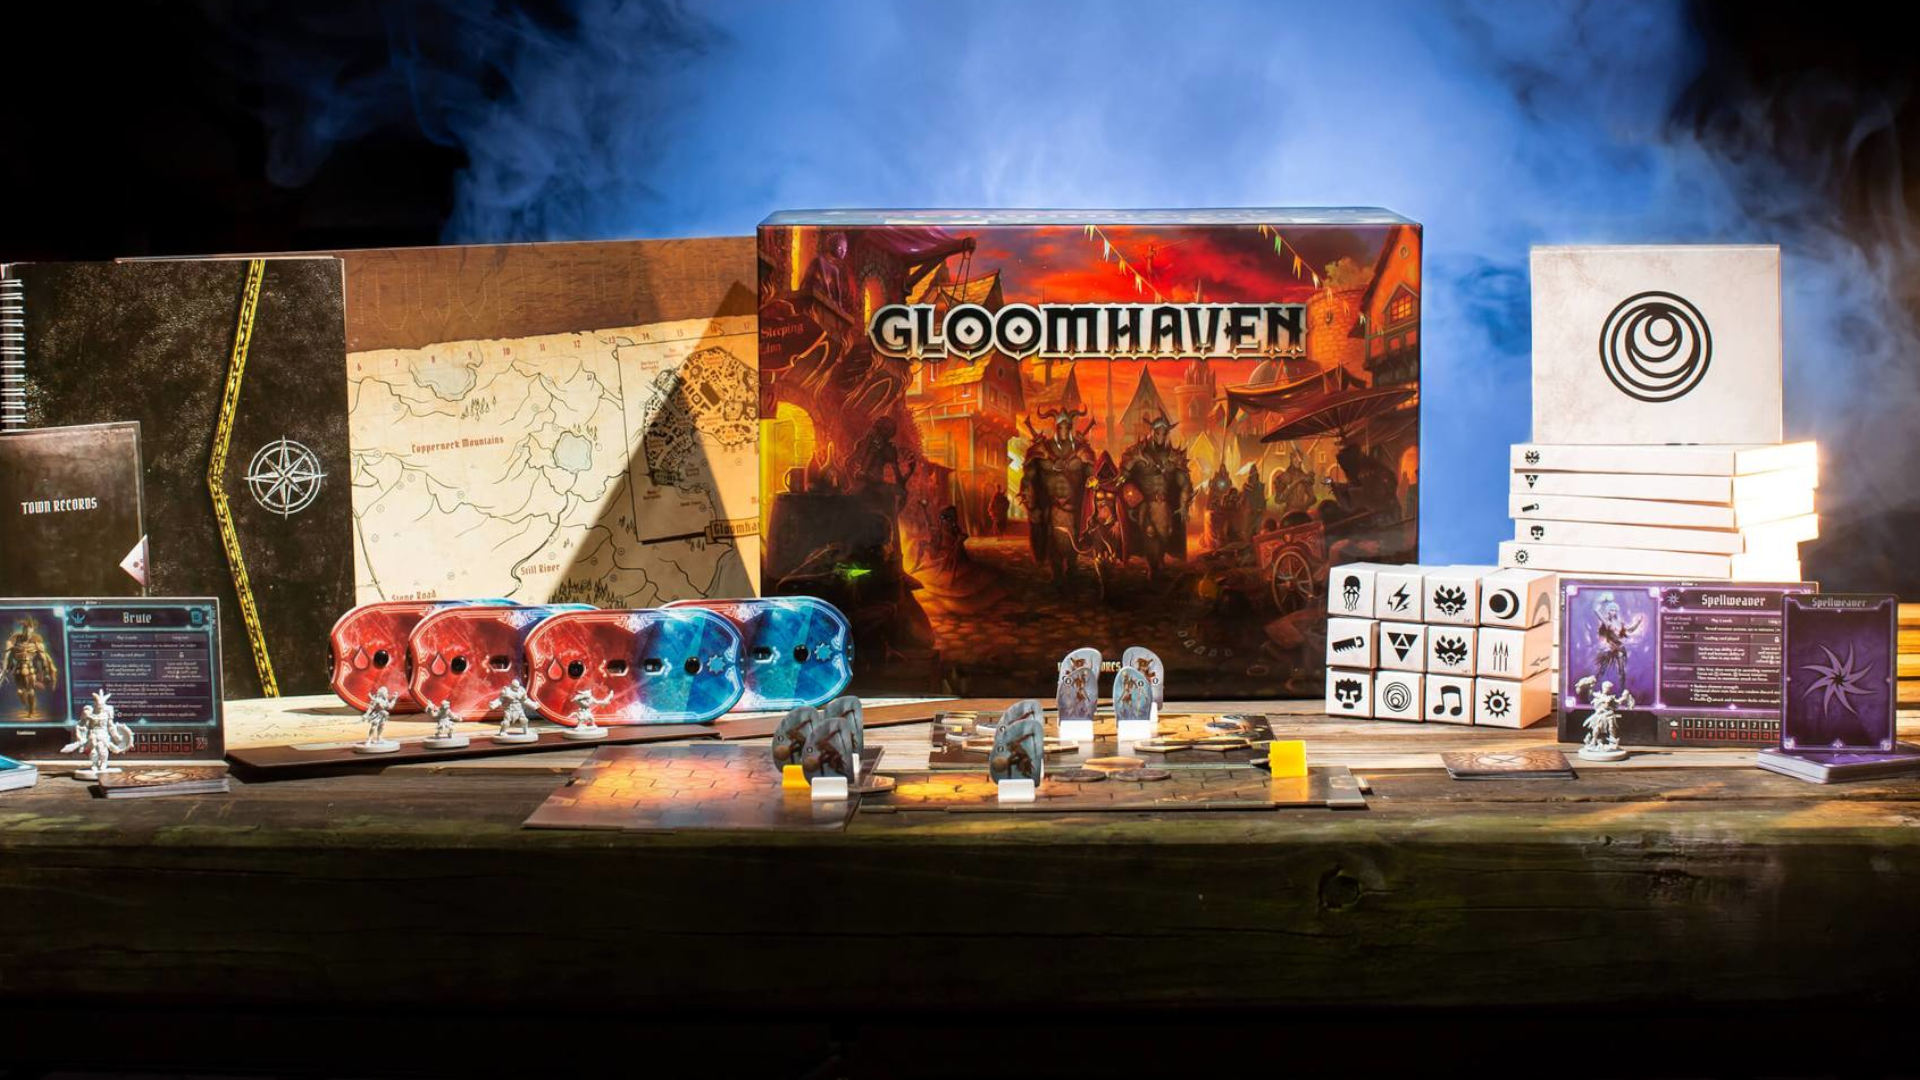 Gloomhaven review: 2017's biggest board game is astoundingly good